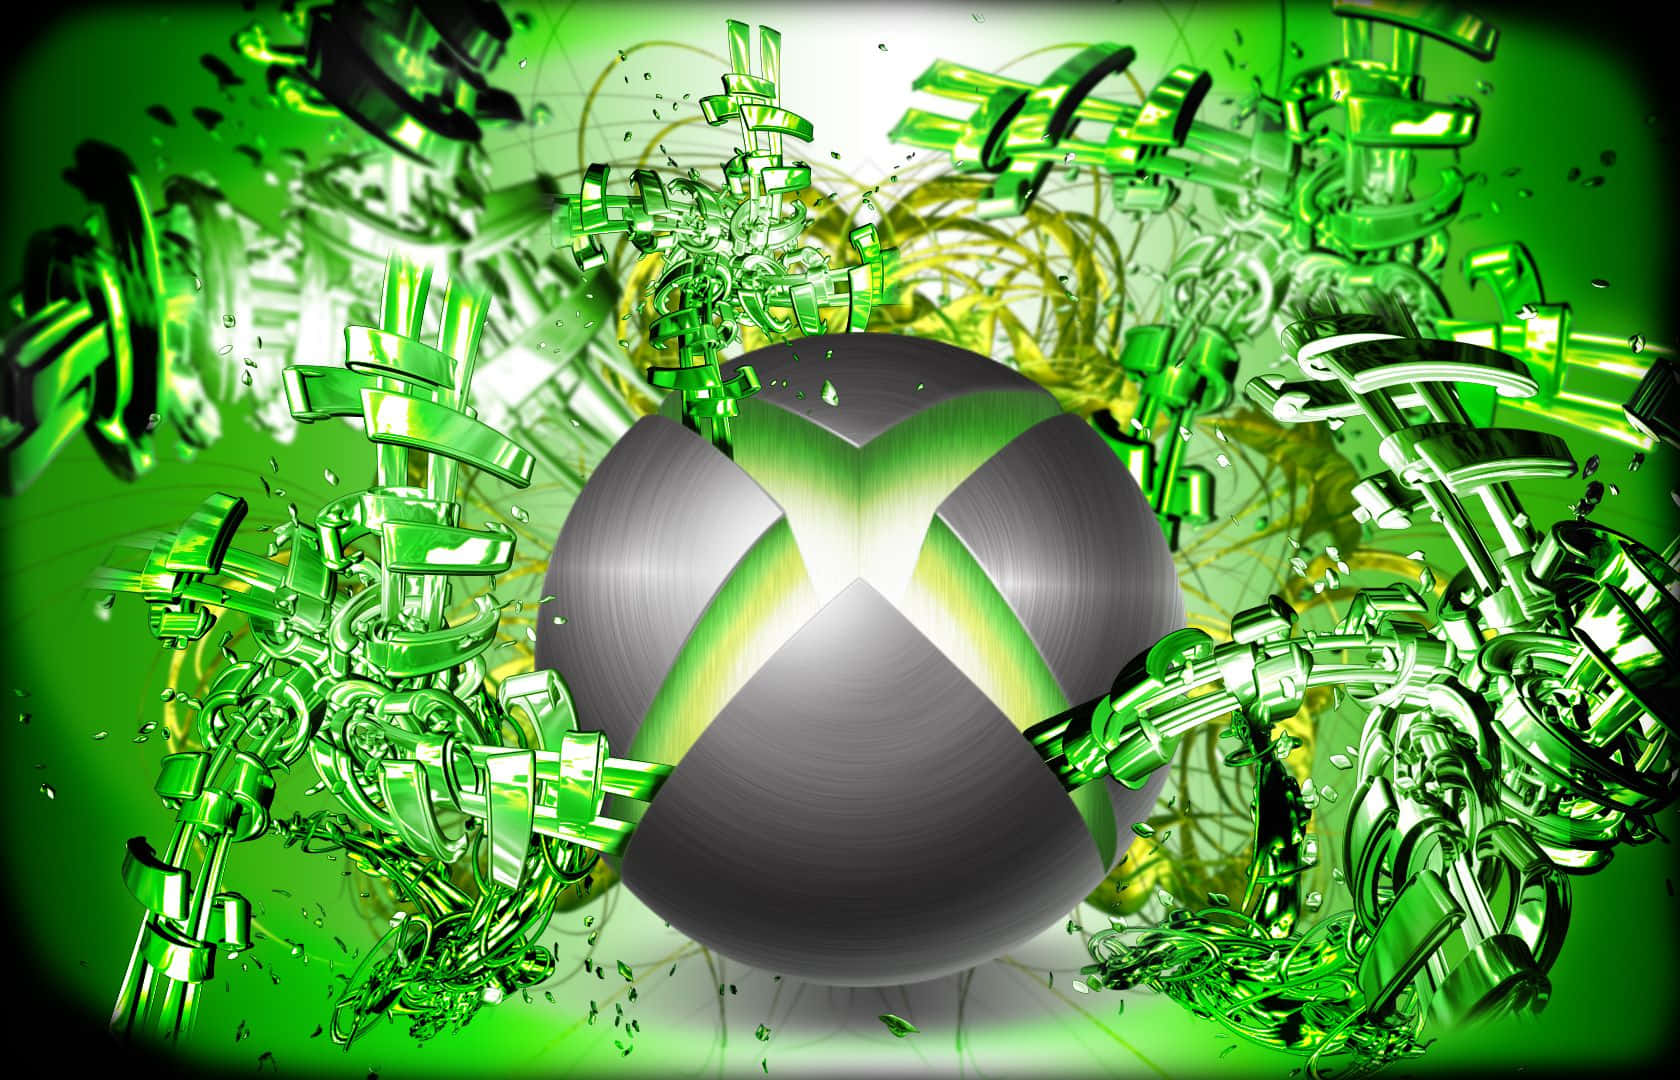 Xbox Wallpapers on WallpaperDog